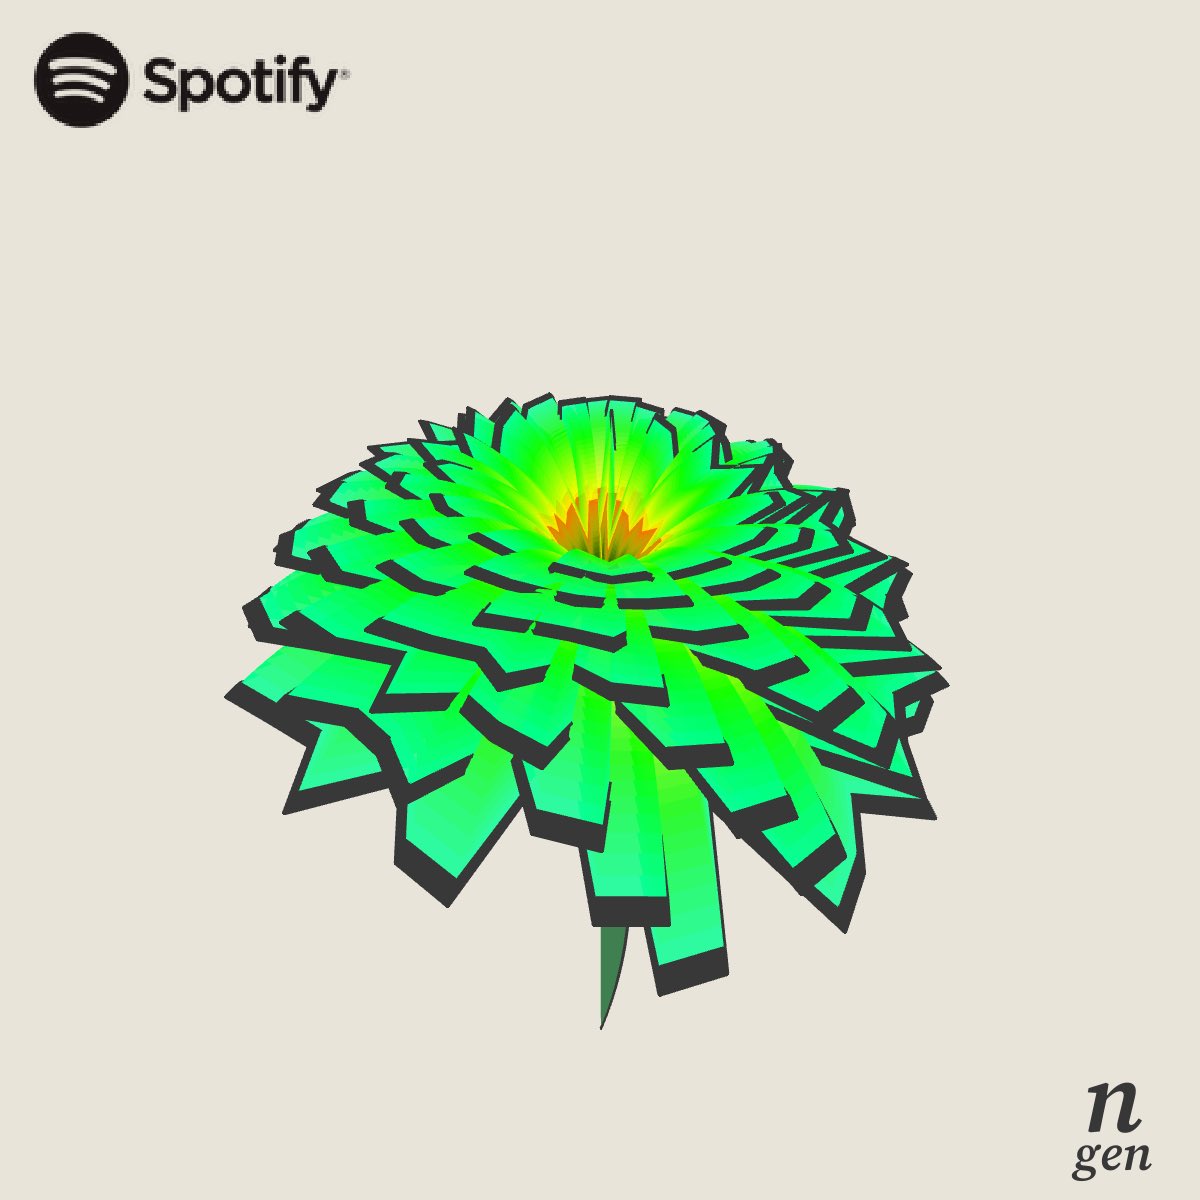 GUYS THERES THIS WEBSITE THAT CREATES A FLOWER BASED OFF THE VIBE OF UR TOP SONGS ON SPOTIFY AND MINE IS A ZINNIA THIS IS SO PERFECT